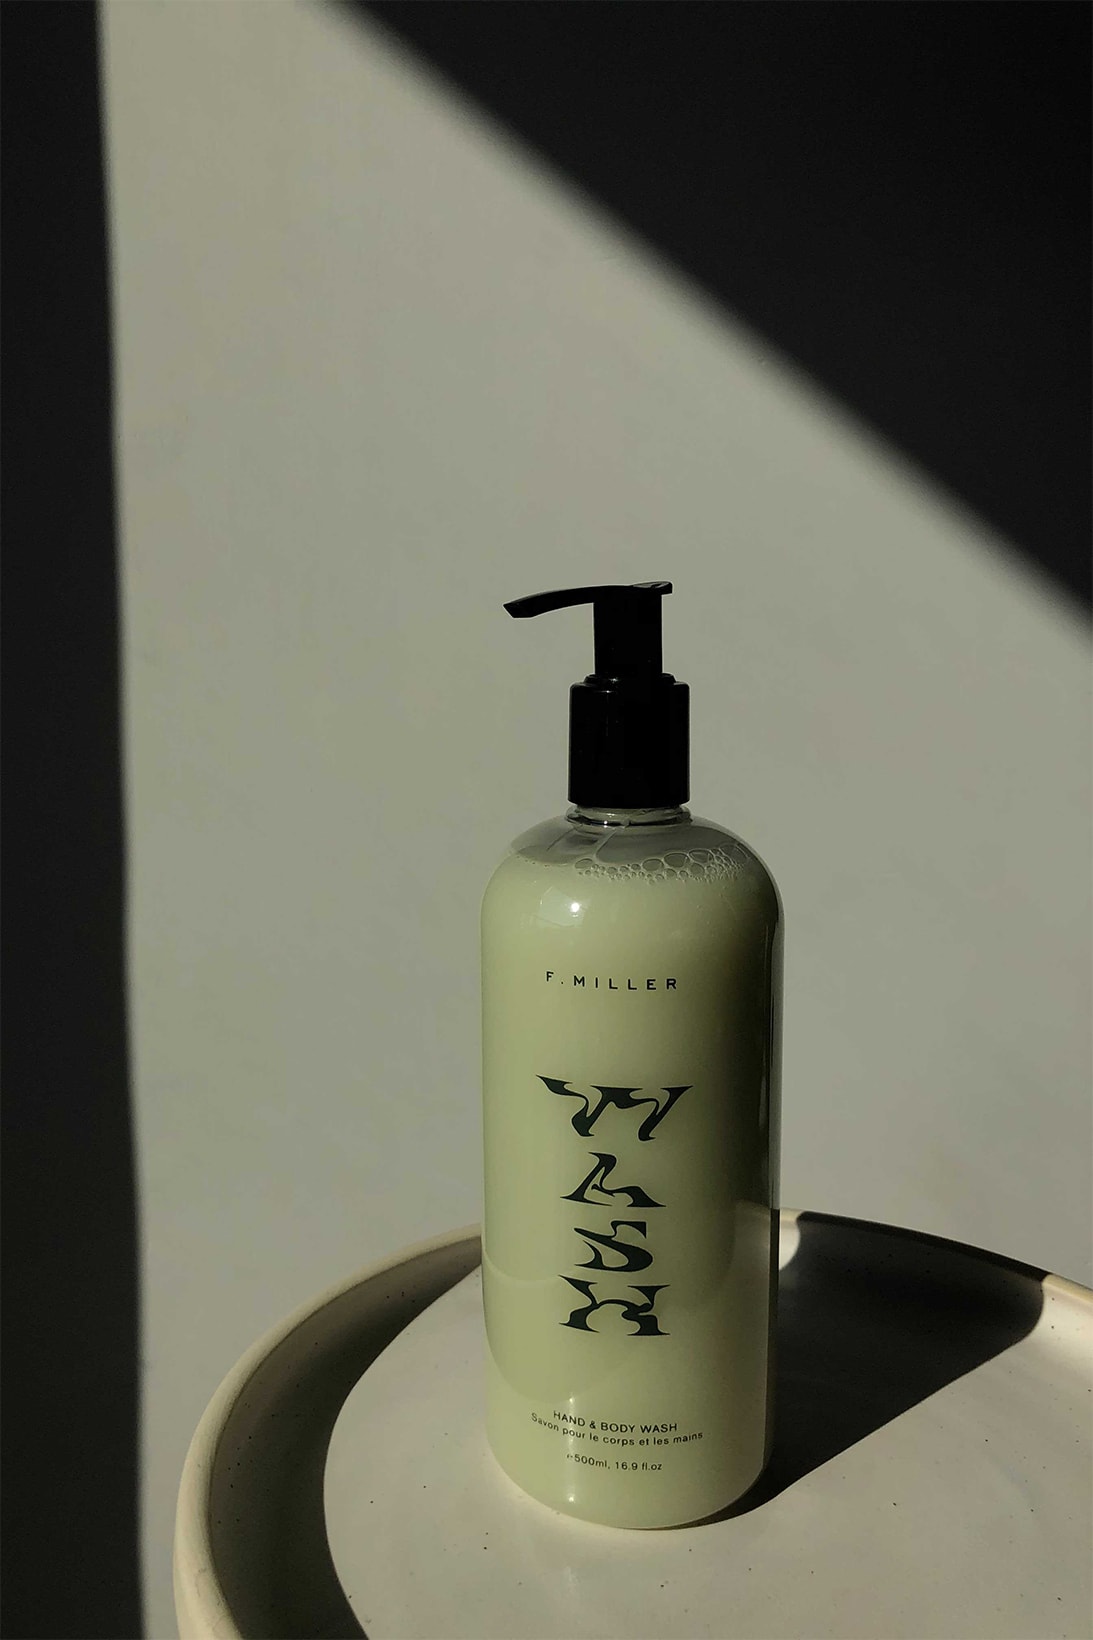 f miller skincare hand body wash clean beauty review sustainable packaging bottle